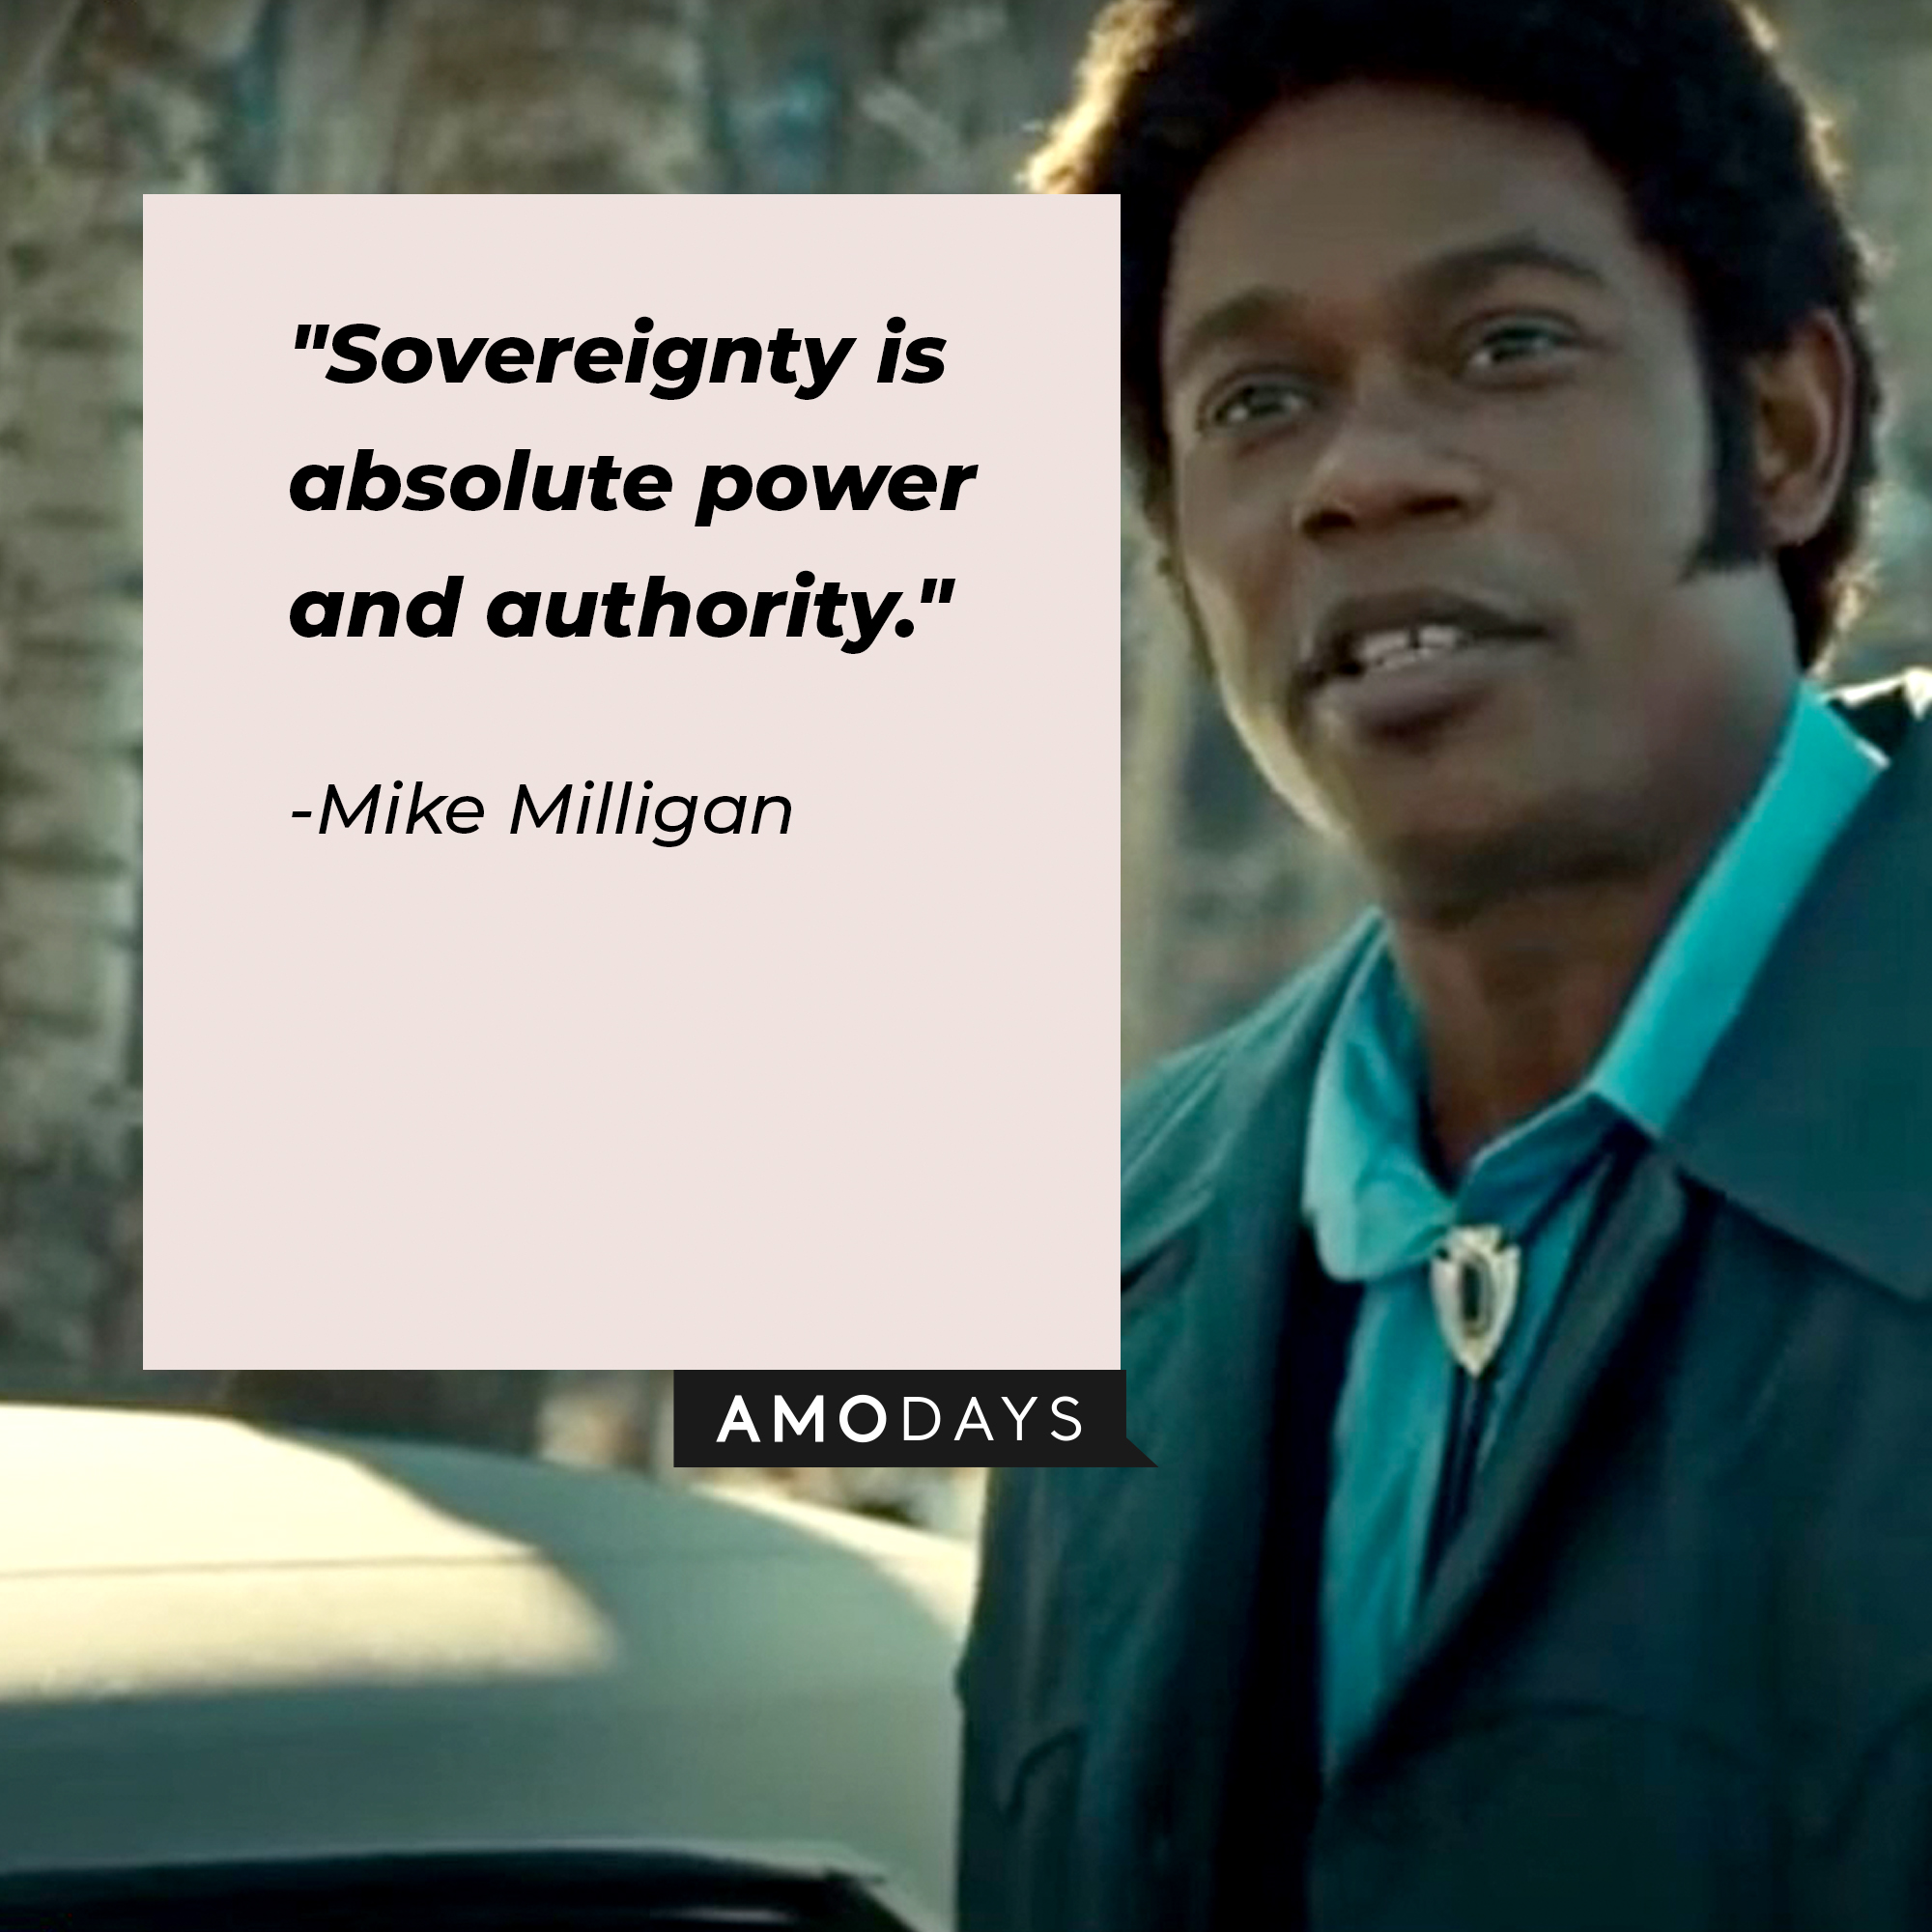 Mike Milligan with his quote: “Sovereignty is absolute power and authority.” |Source:   youtube.com/Netflix